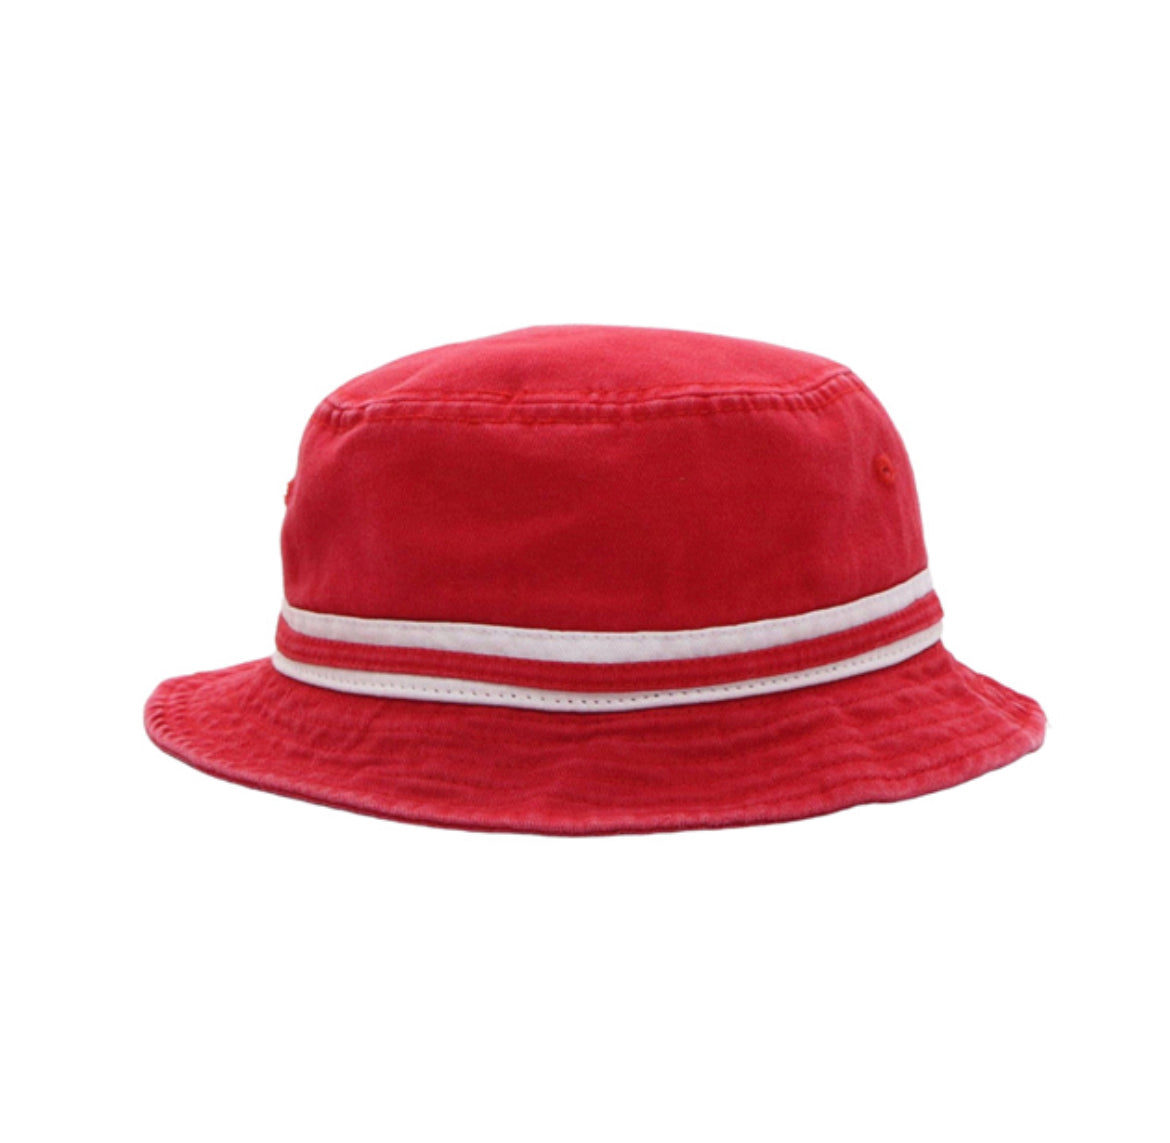 Show off your Kappa Alpha Psi pride with this trendy floating K bucket hat! Perfect for any occasion, this hat will make a statement wherever you go. The iconic Kappa Alpha Psi logo is prominently displayed on the front, making it clear to all who see it that you are a member of this prestigious fraternity.